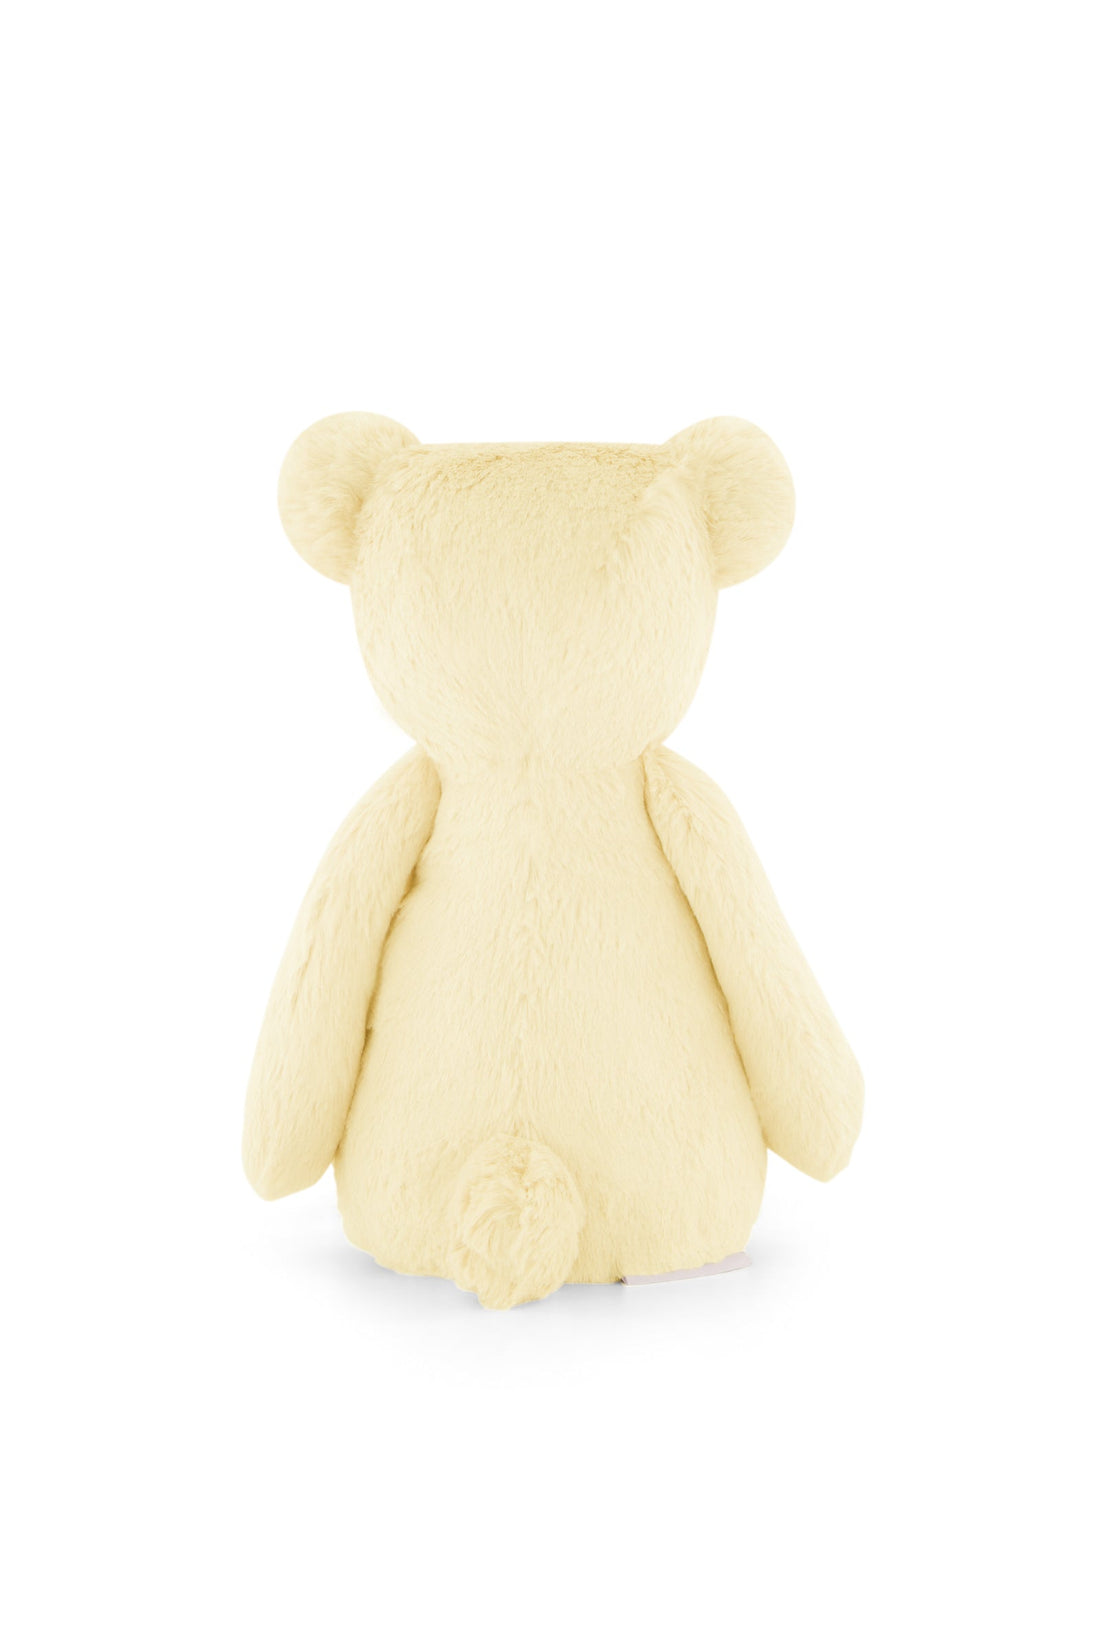 Snuggle Bunnies - George the Bear - Anise Childrens Toy from Jamie Kay NZ